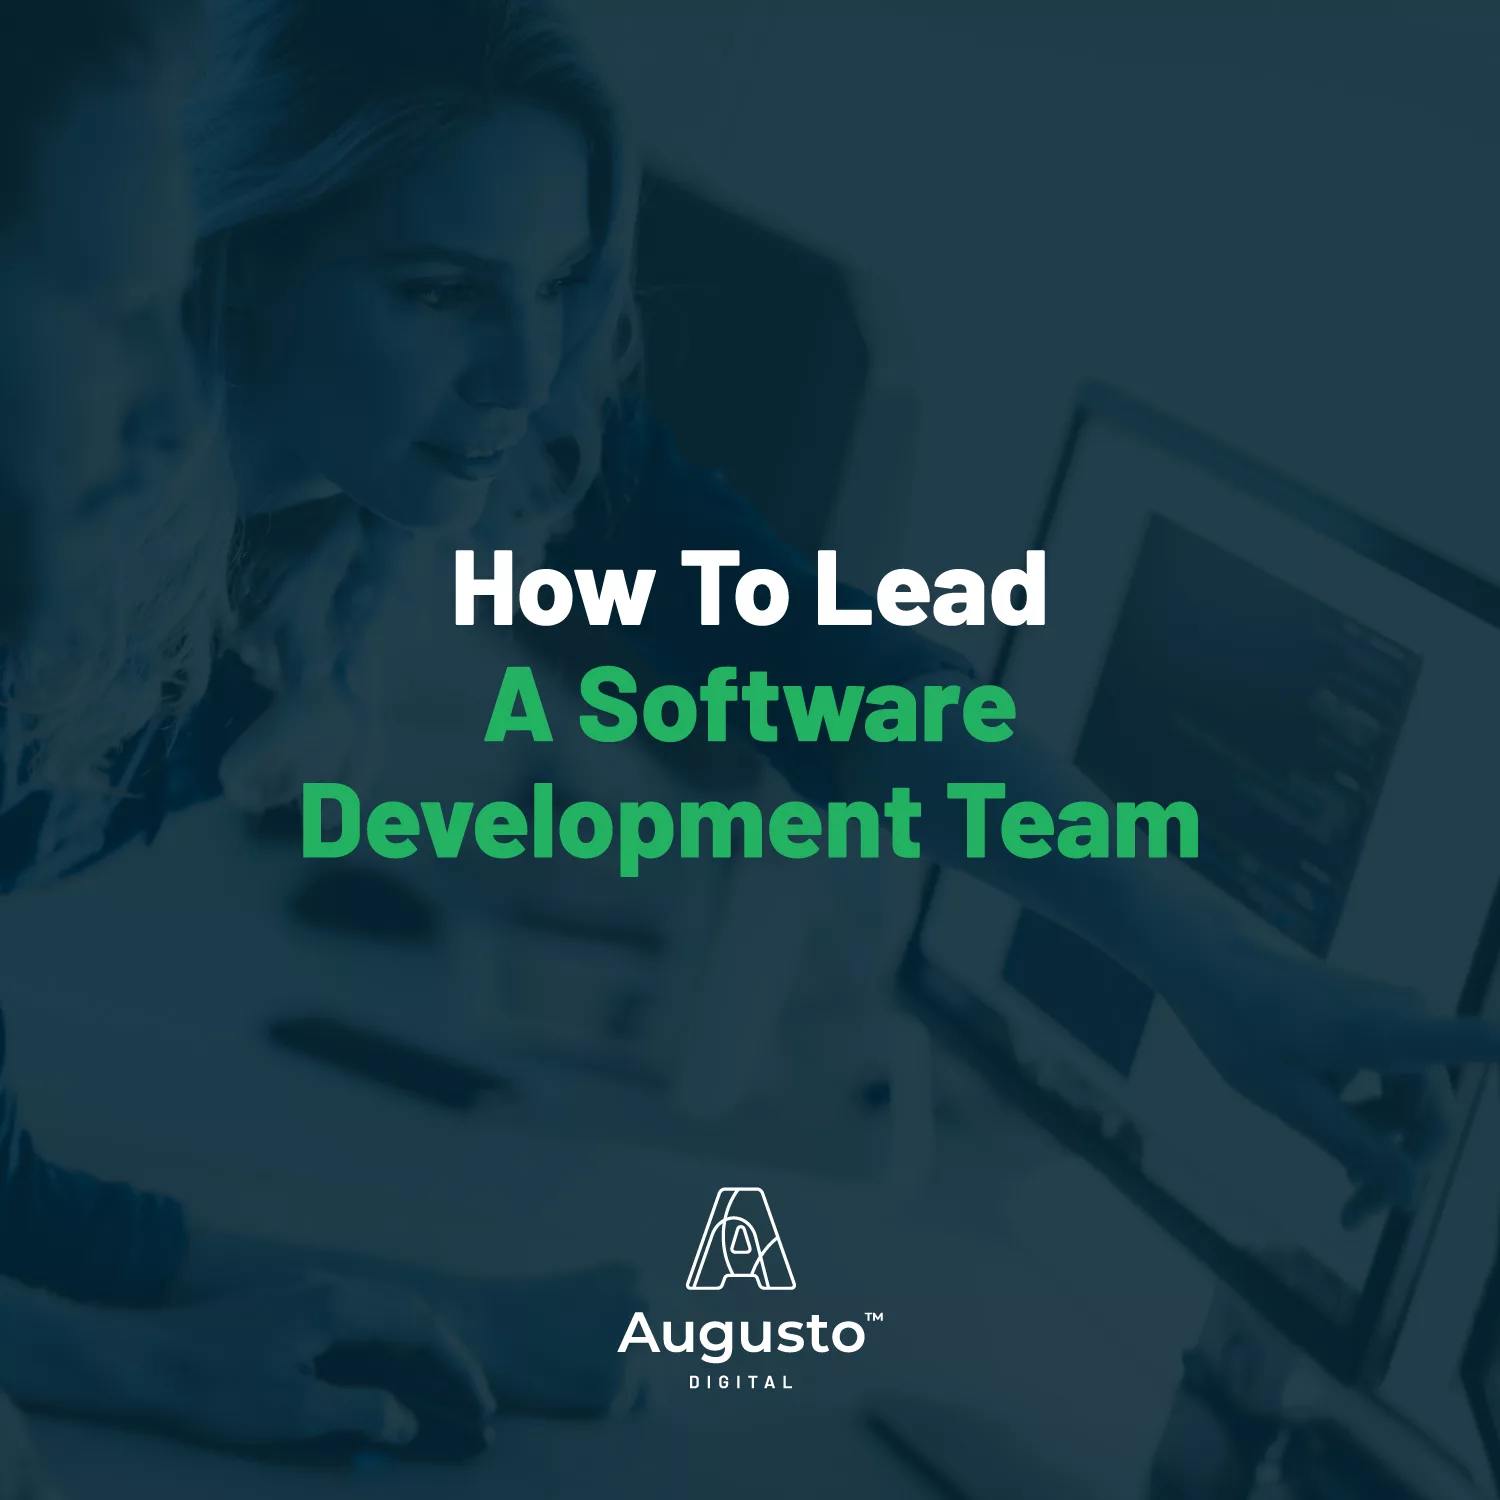 How to Lead a Software Development Team